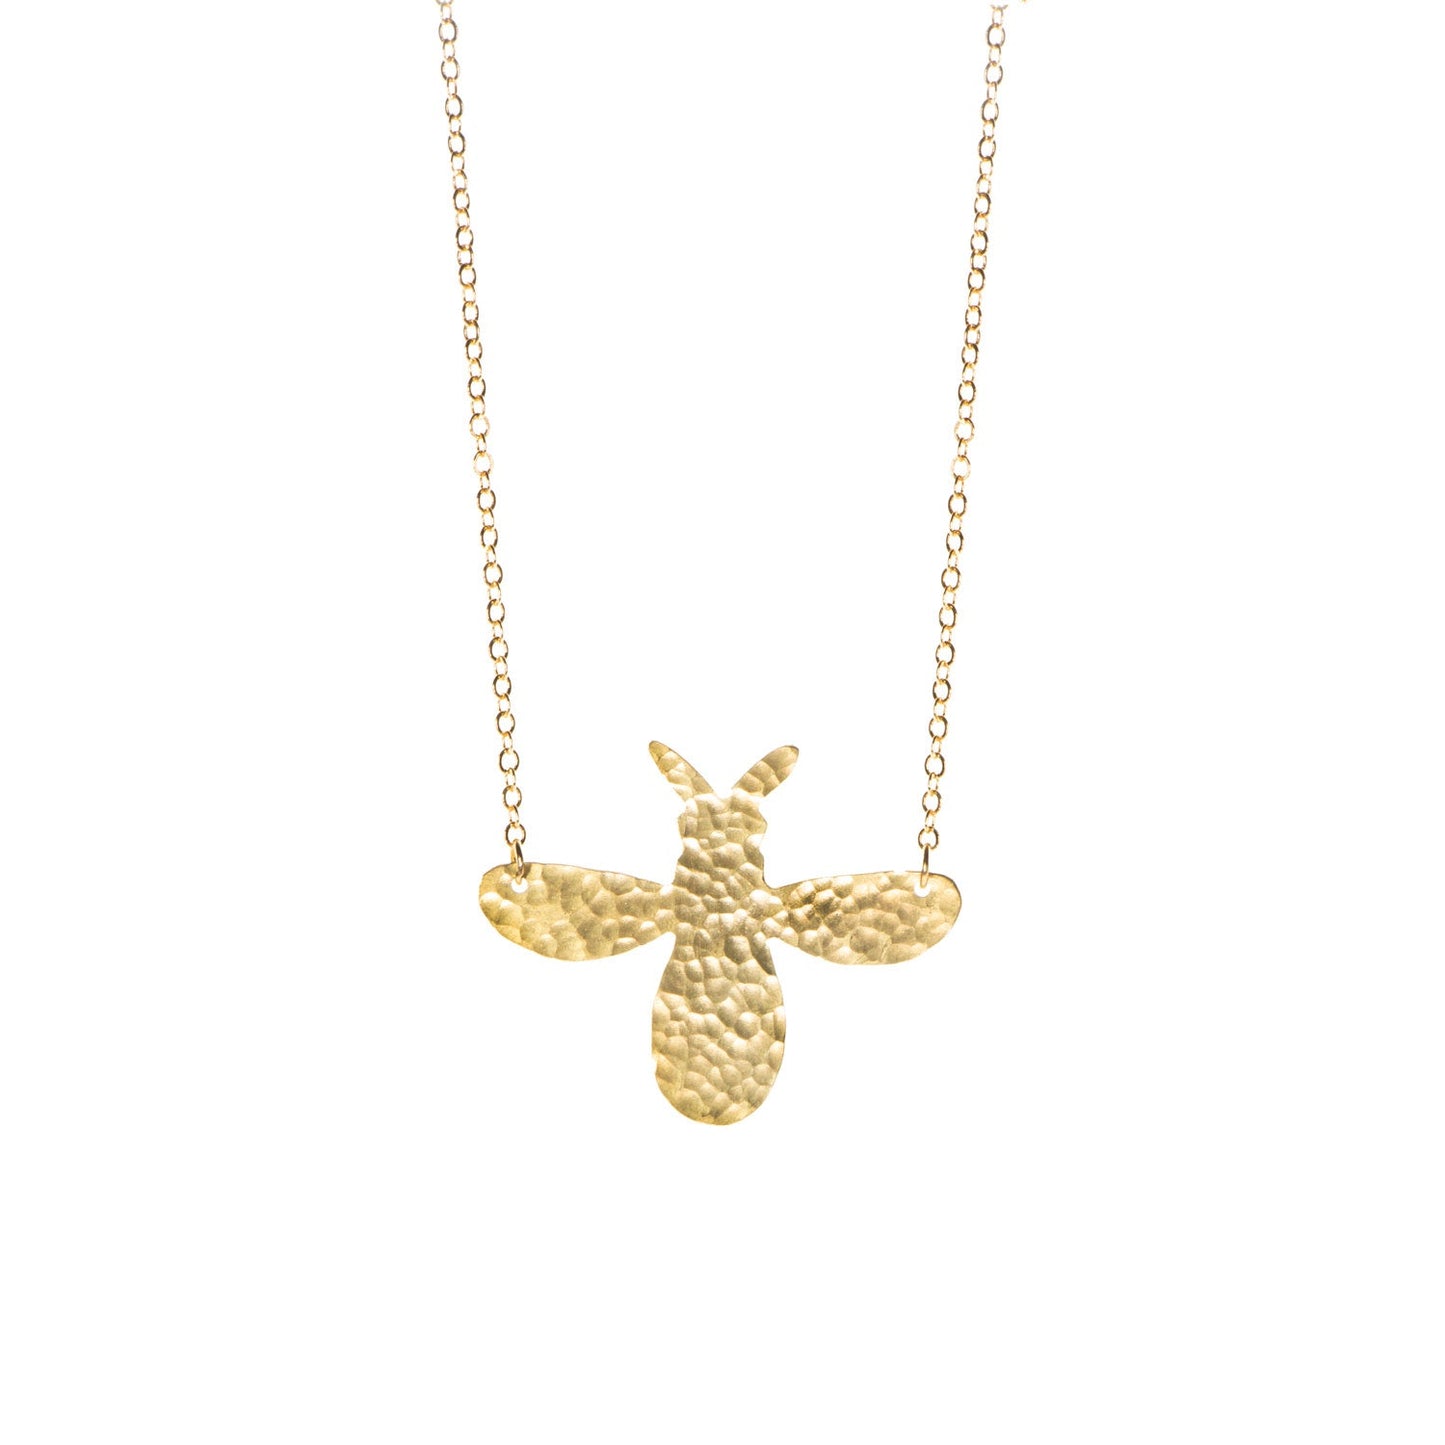 Brass bee pendant on a white background.